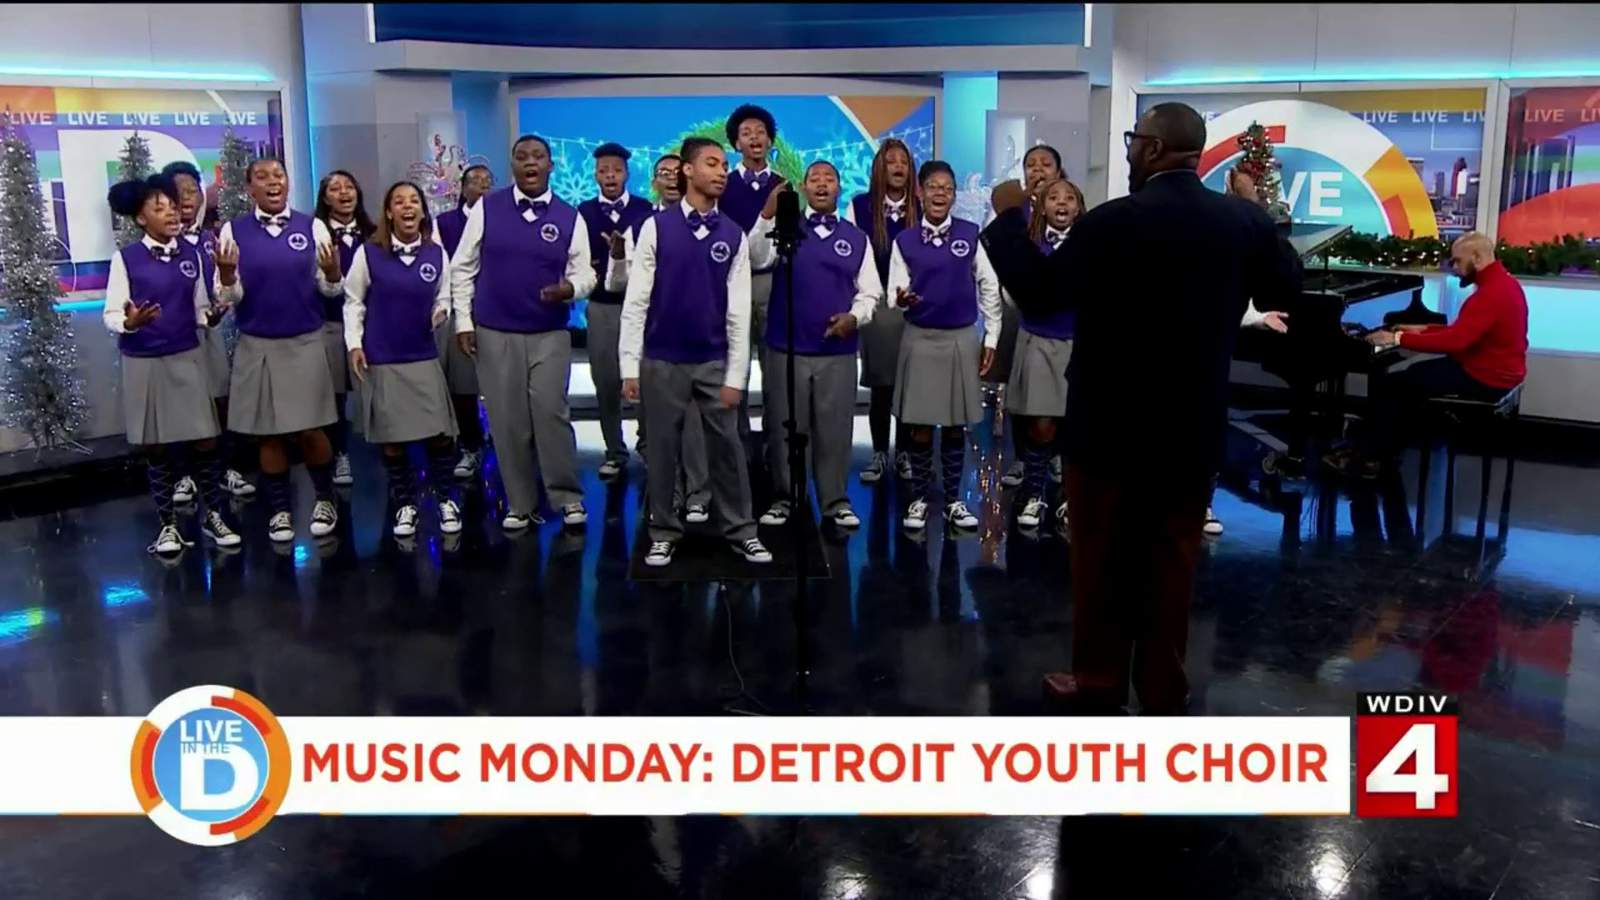 The Detroit Youth Choir continues to sing their hearts out